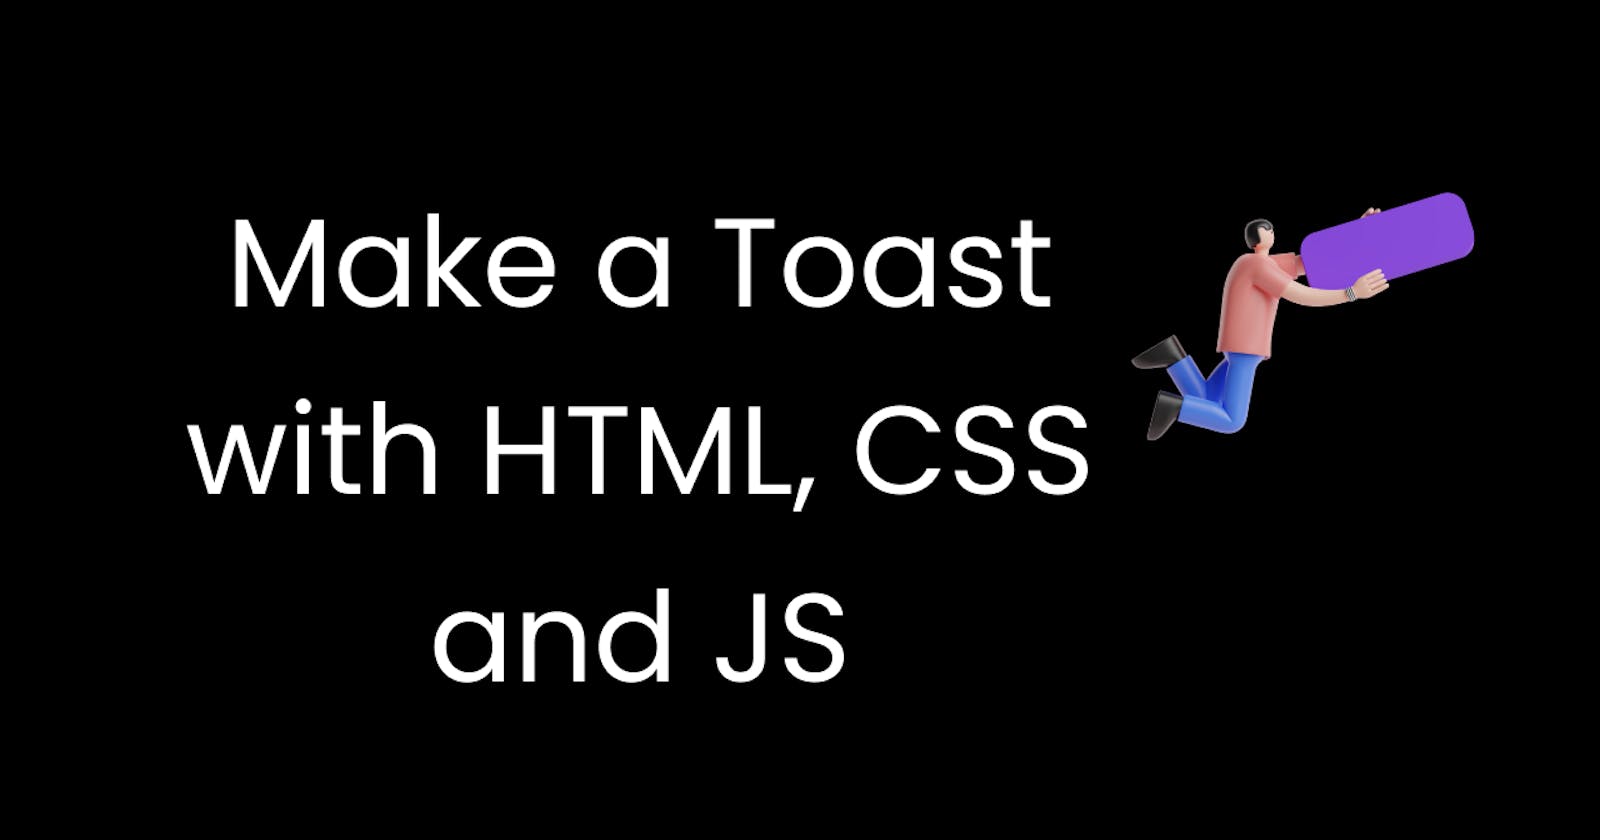 Make a toast with HTML, CSS, and JS